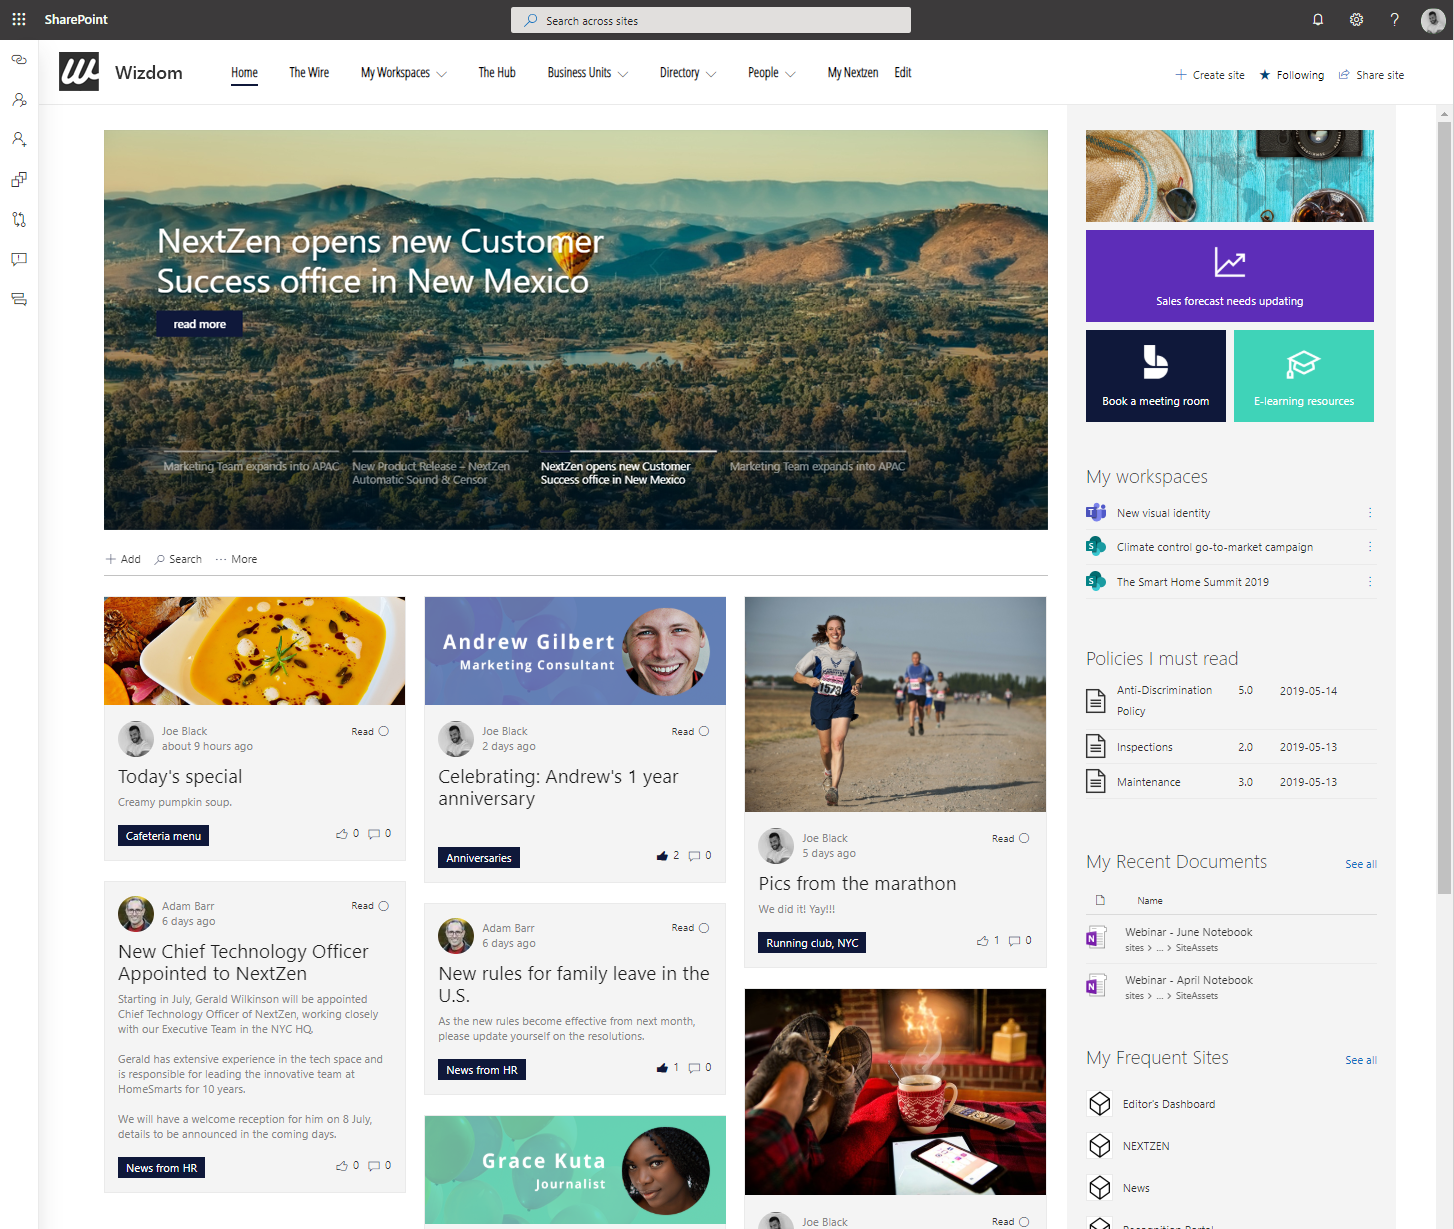 SharePoint home sites: a landing for your organization on the